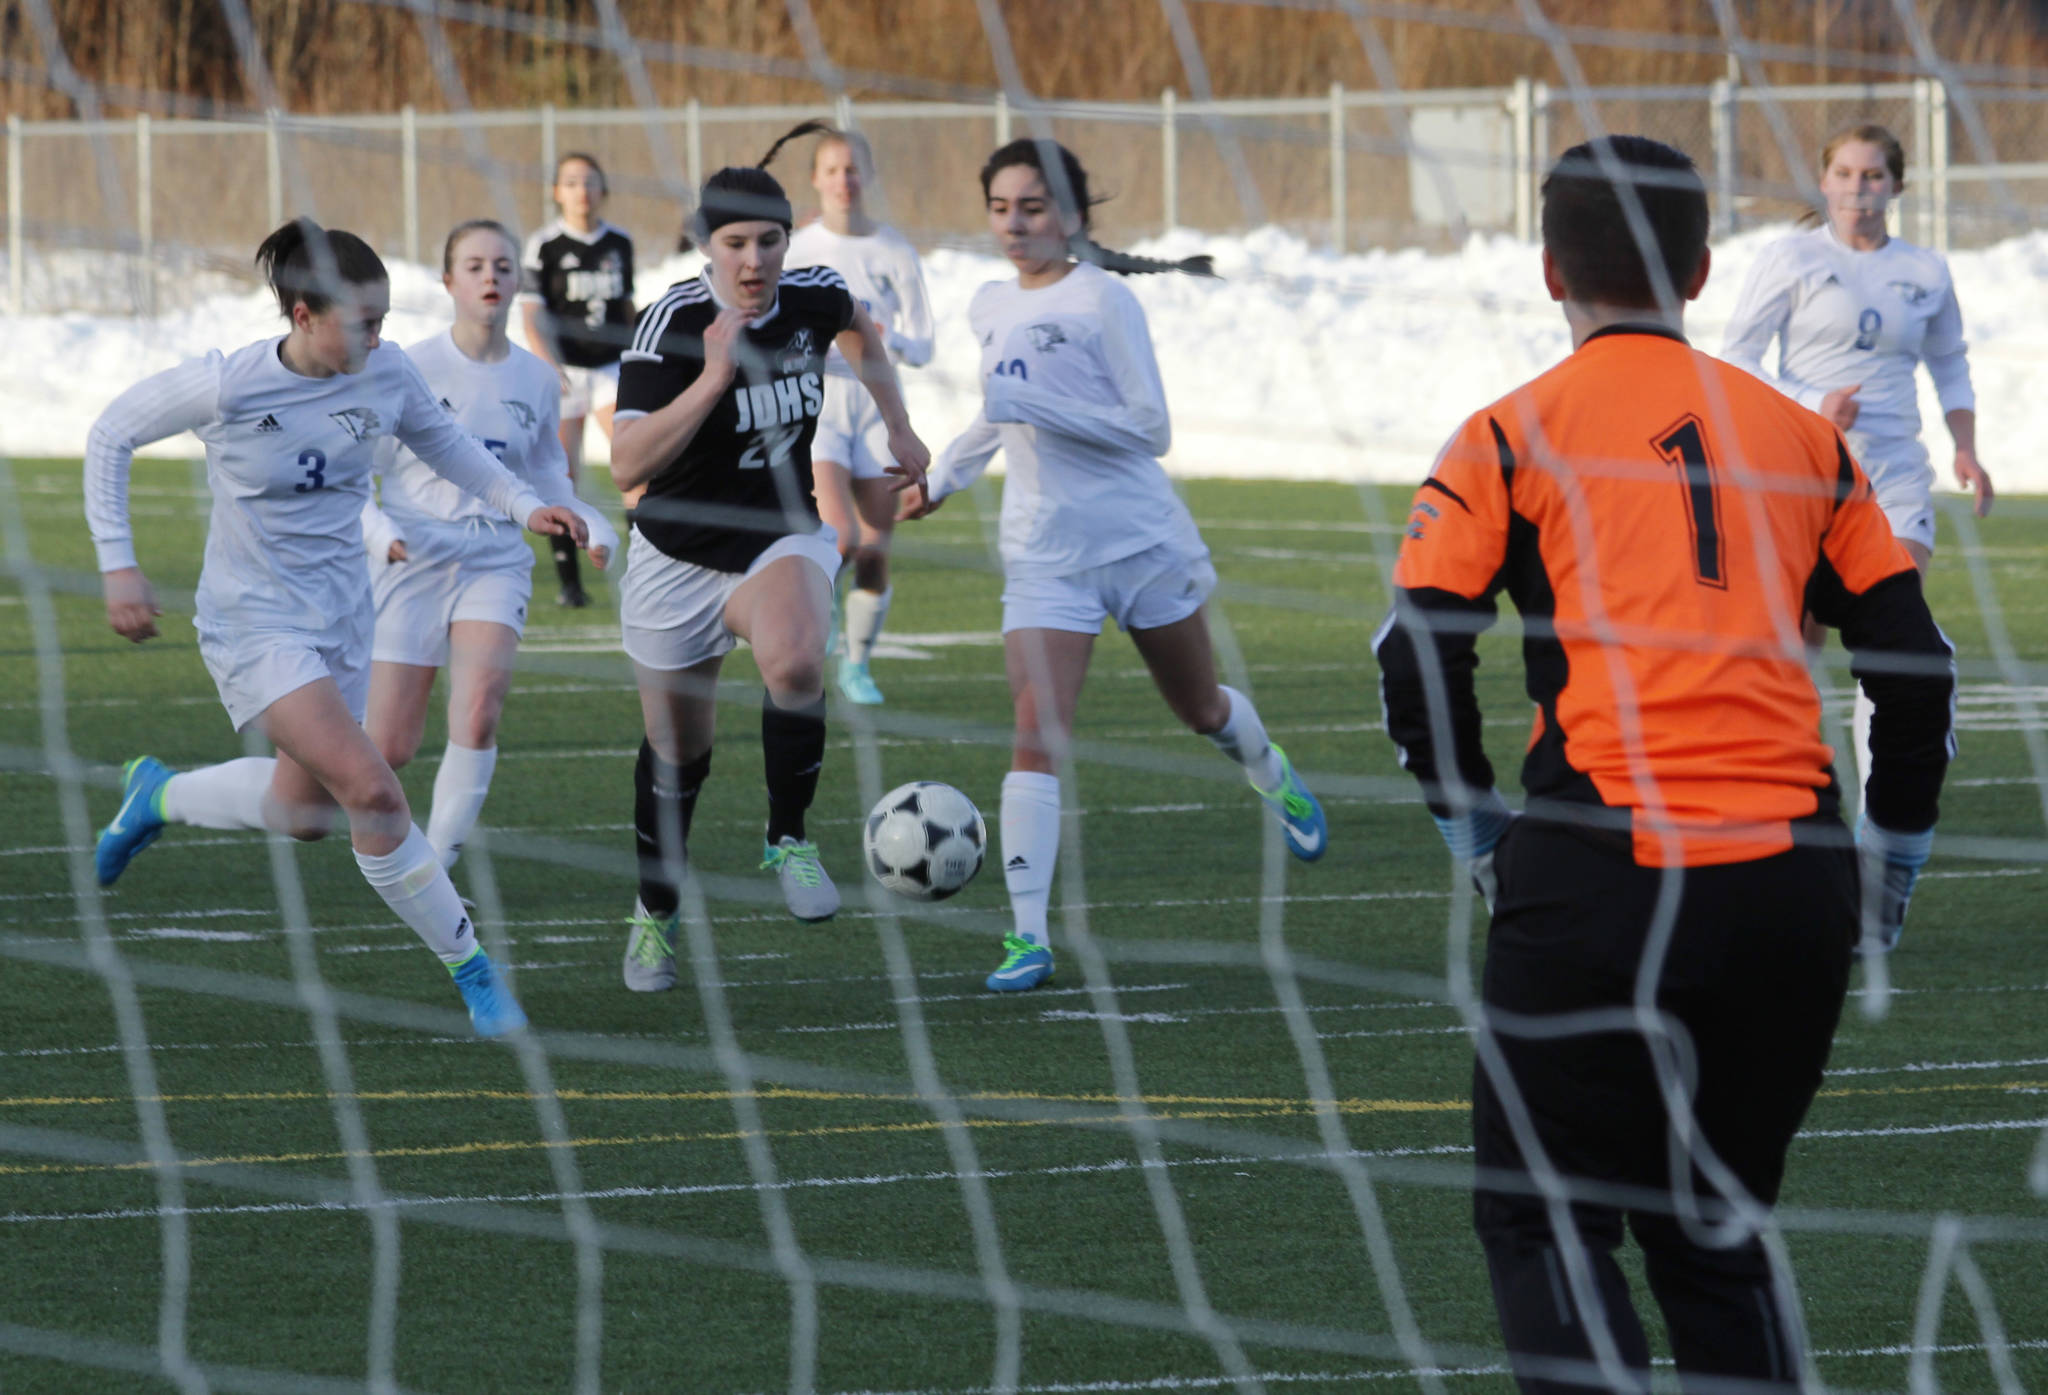 Juneau-Douglas High School junior Nikki Box drives prepares to take a shot in the Crimson Bears’ 5-2 win over Thunder Mountain High School on Friday, March 30, 2018. Box eventually scored in the 78th minute. (Alex McCarthy | Juneau Empire)